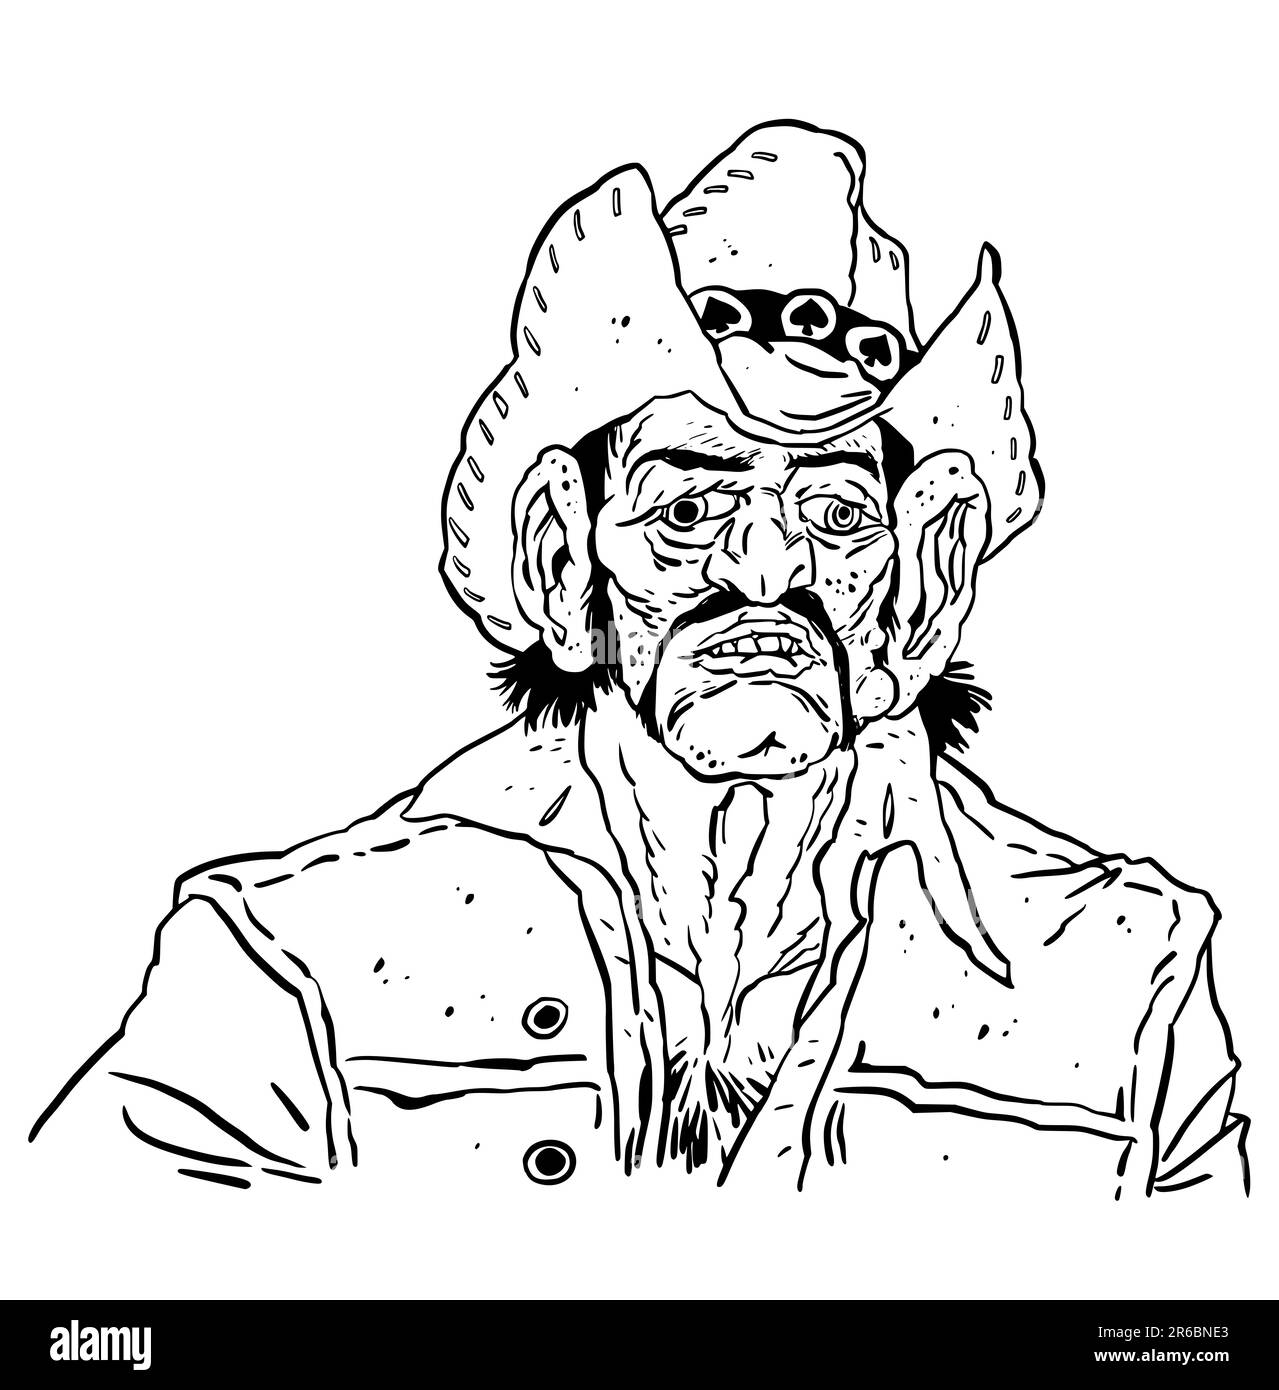 Caricature of Lemmy Ian Fraser Kilmister who founded and fronted the rock metal band Motörhead, British, Hand drawn Portrait Drawing. Stock Photo